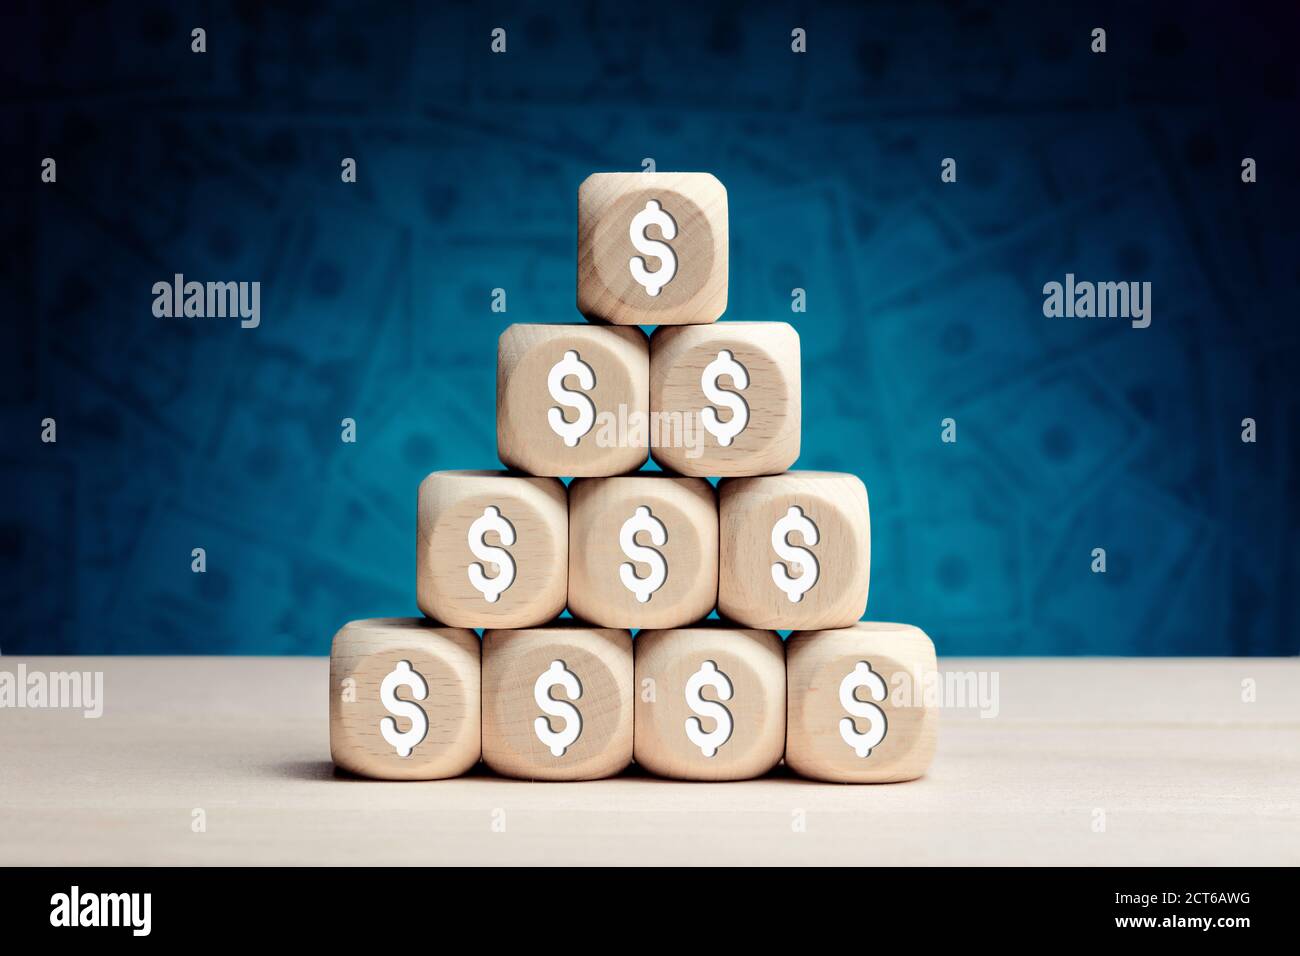 US dollar symbol on wooden cubes against money background. Financial growth, profit, investment or savings in business and finance concept. Stock Photo